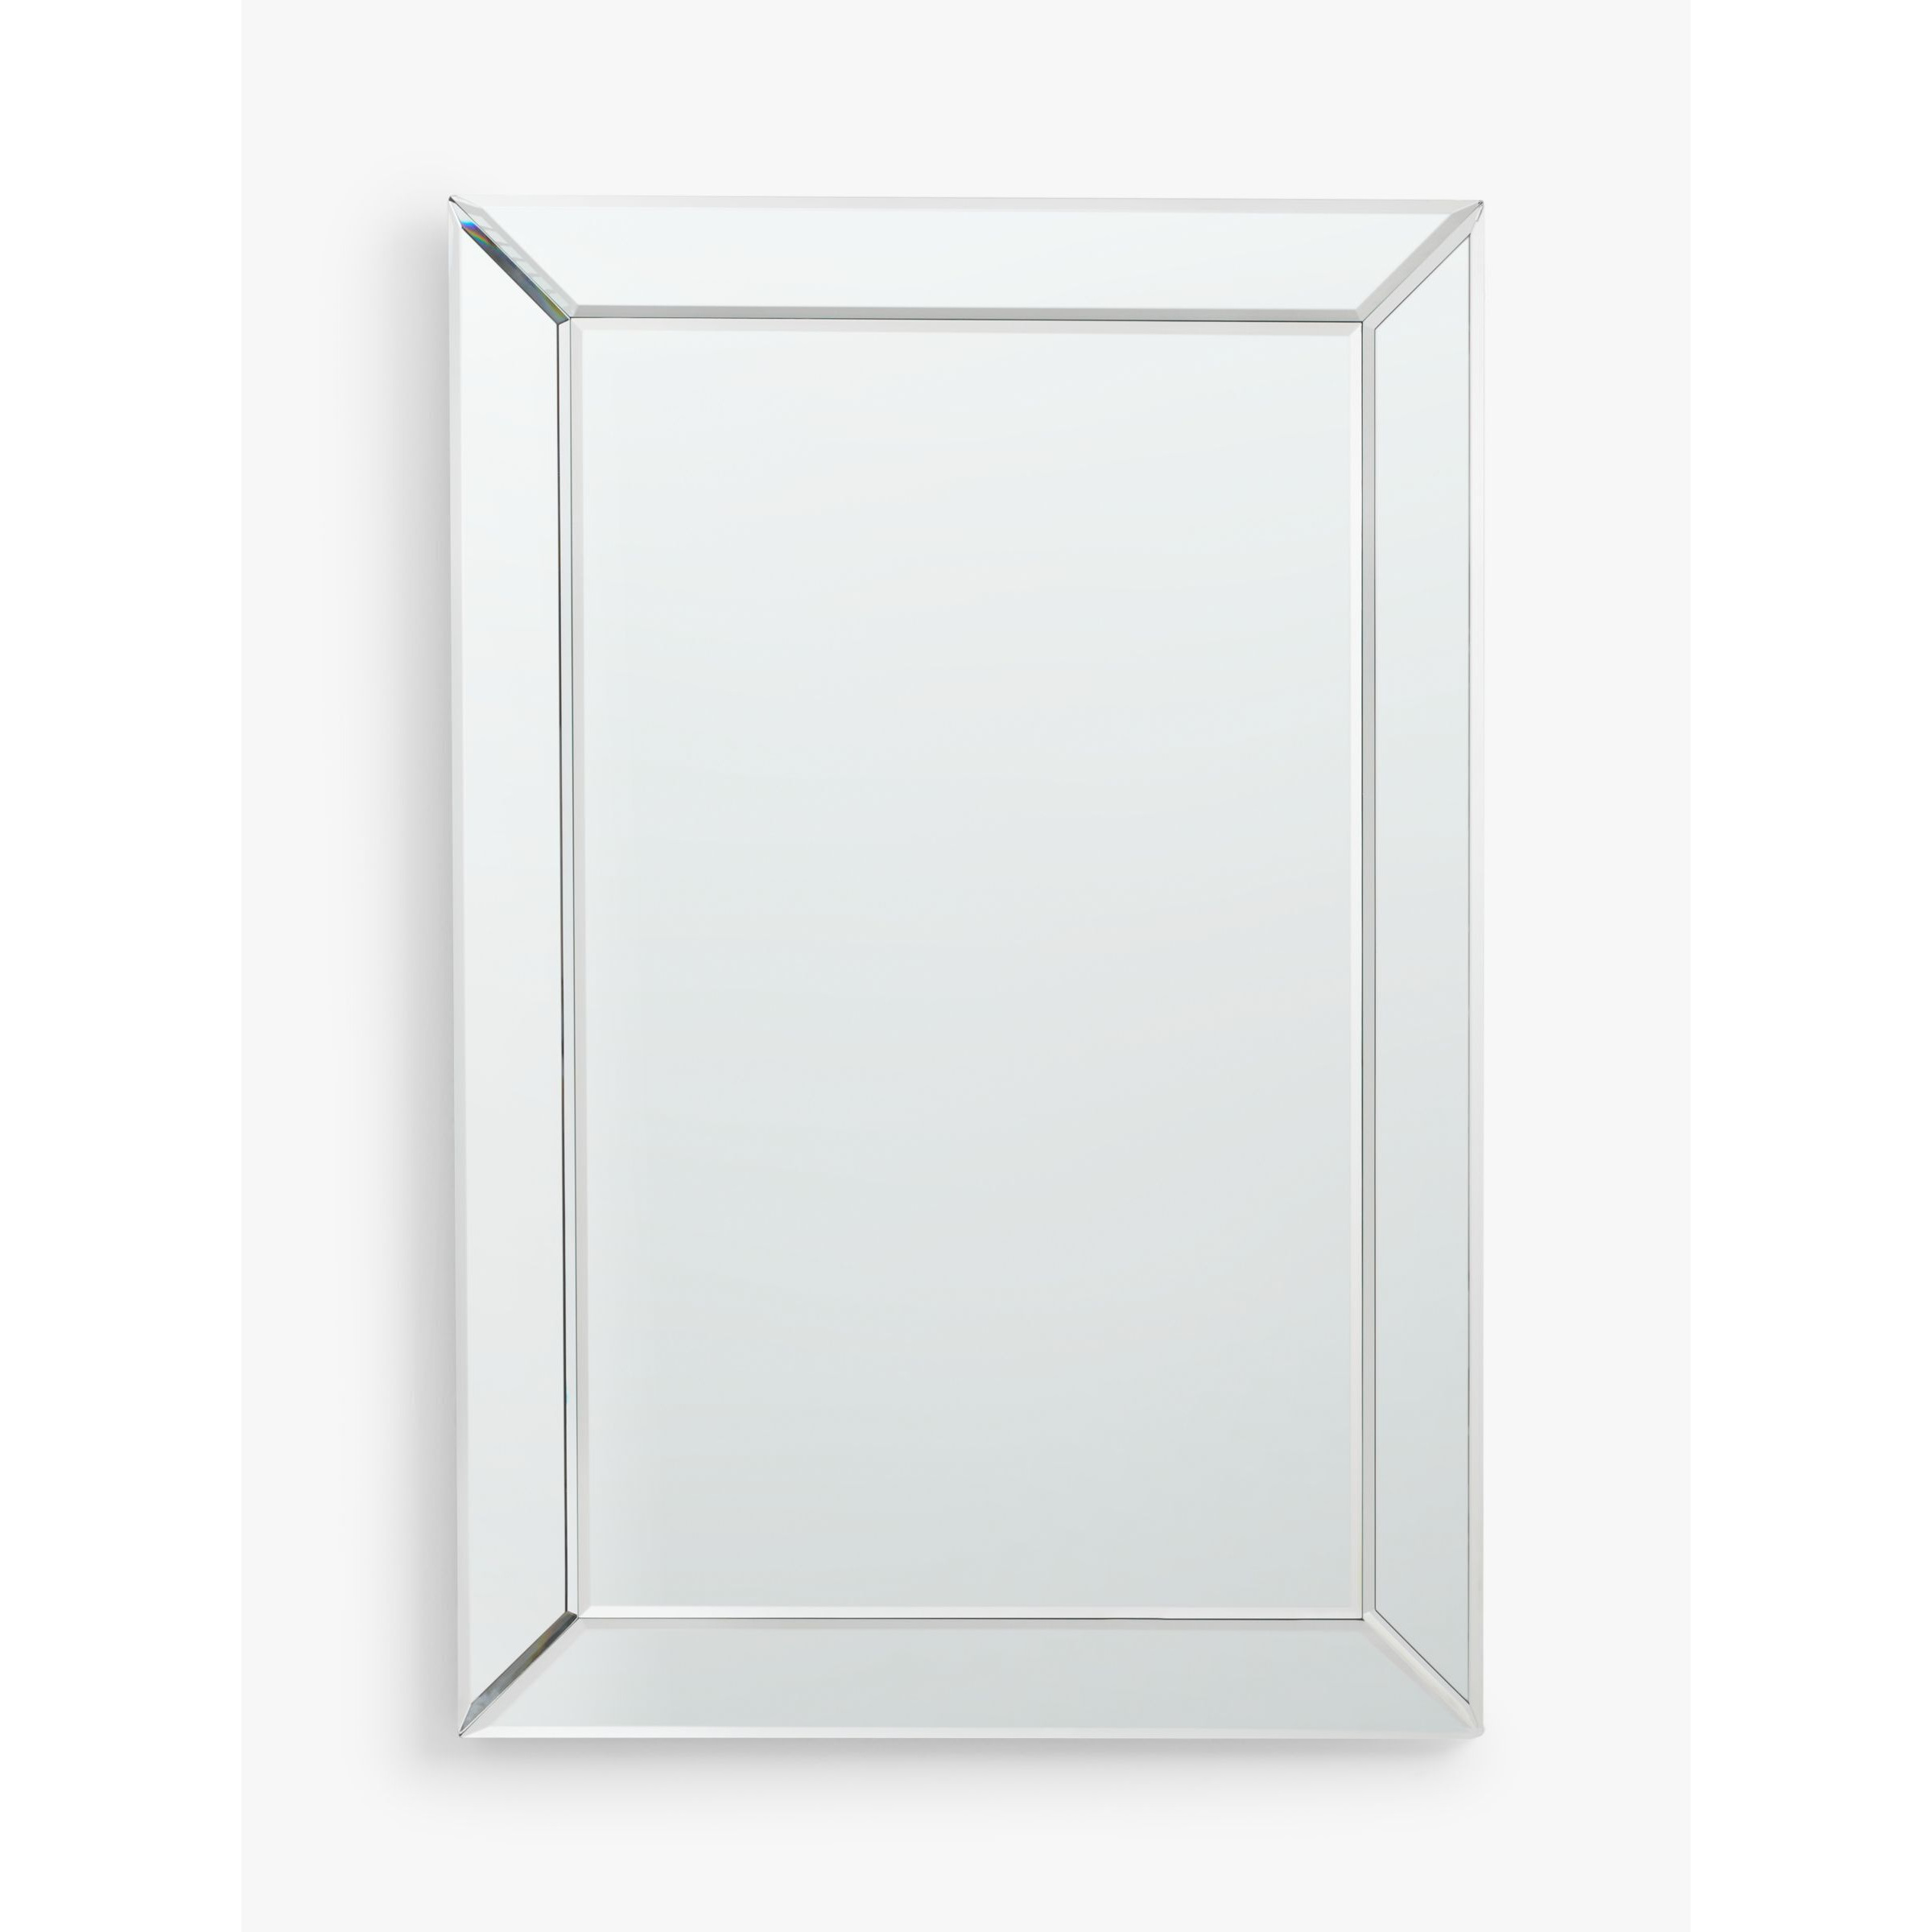 John Lewis Simple Bevelled Glass Rectangular Wall Mirror, Clear - image 1